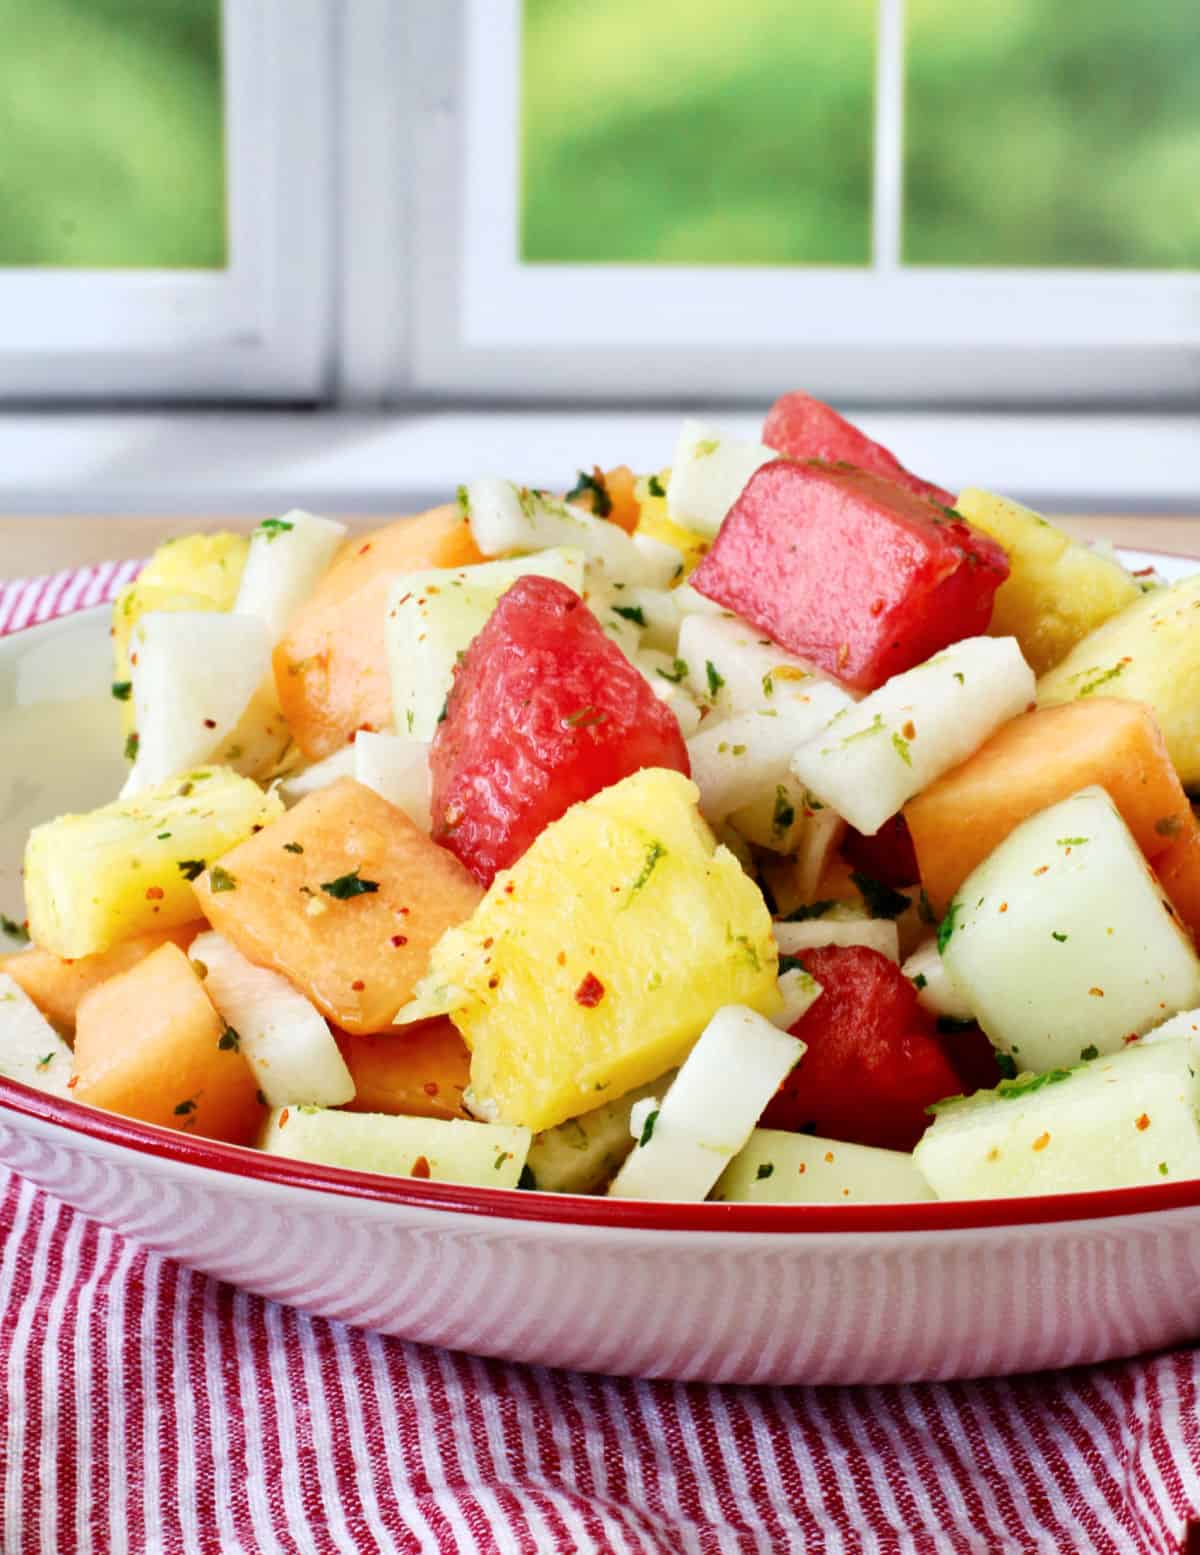 Melon, Jicama, and Pineapple Salad in red rimmed bowls.